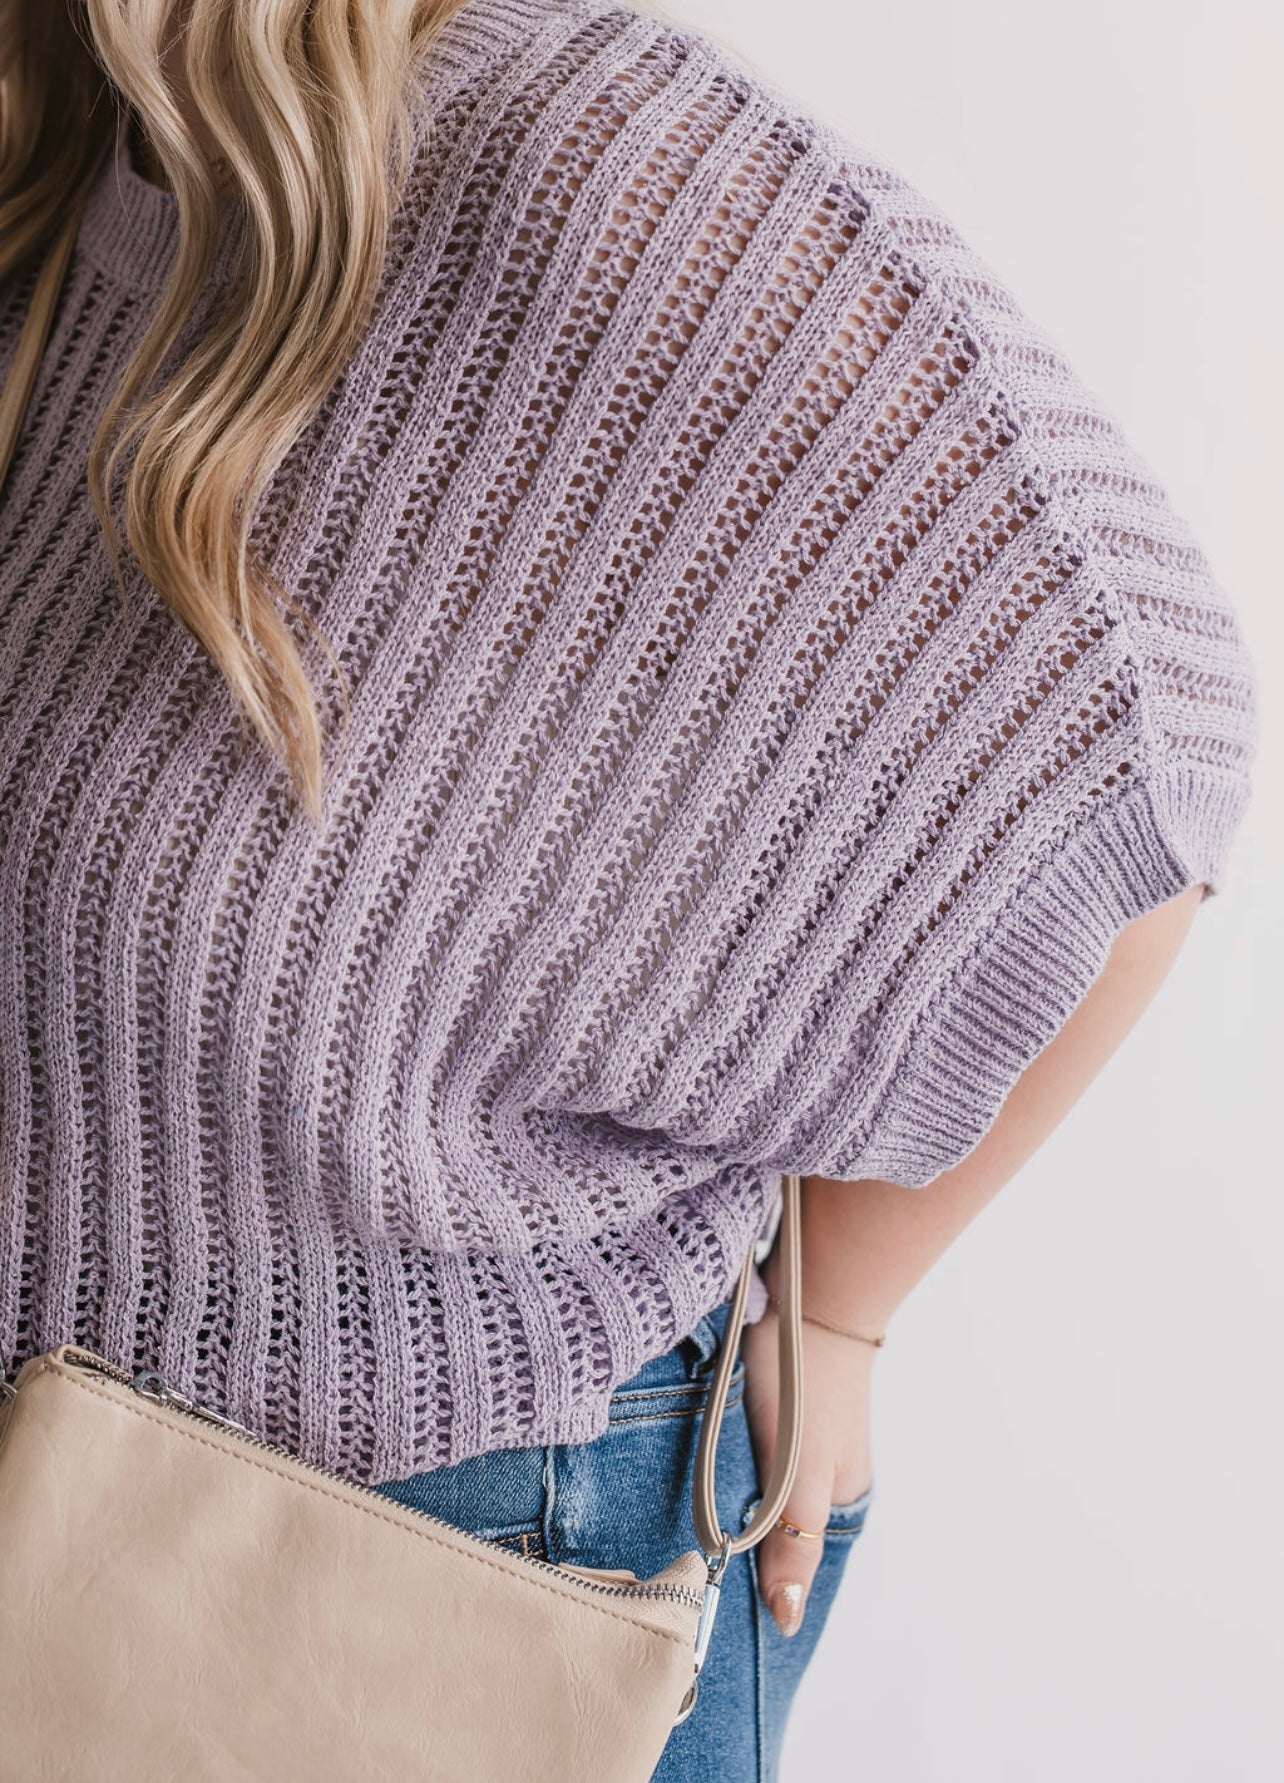 The Kendall Knit Top